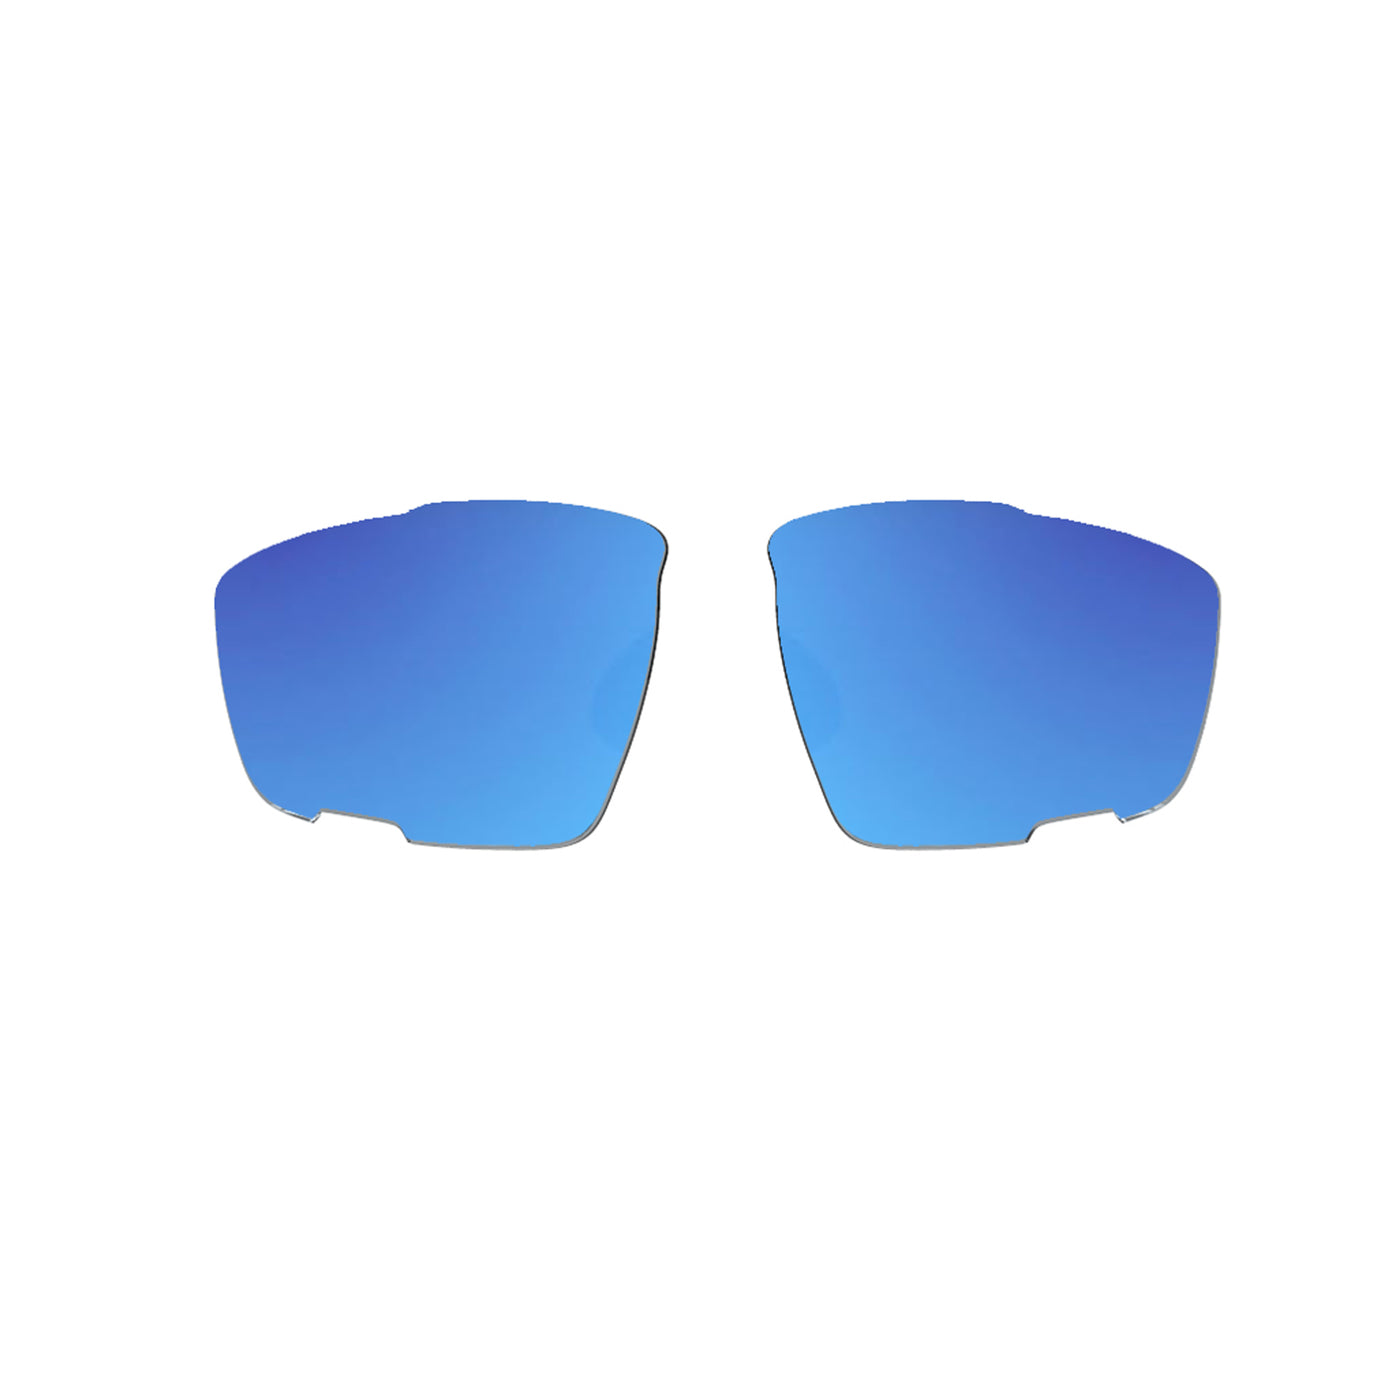 Sintryx Outlet Replacement Lenses